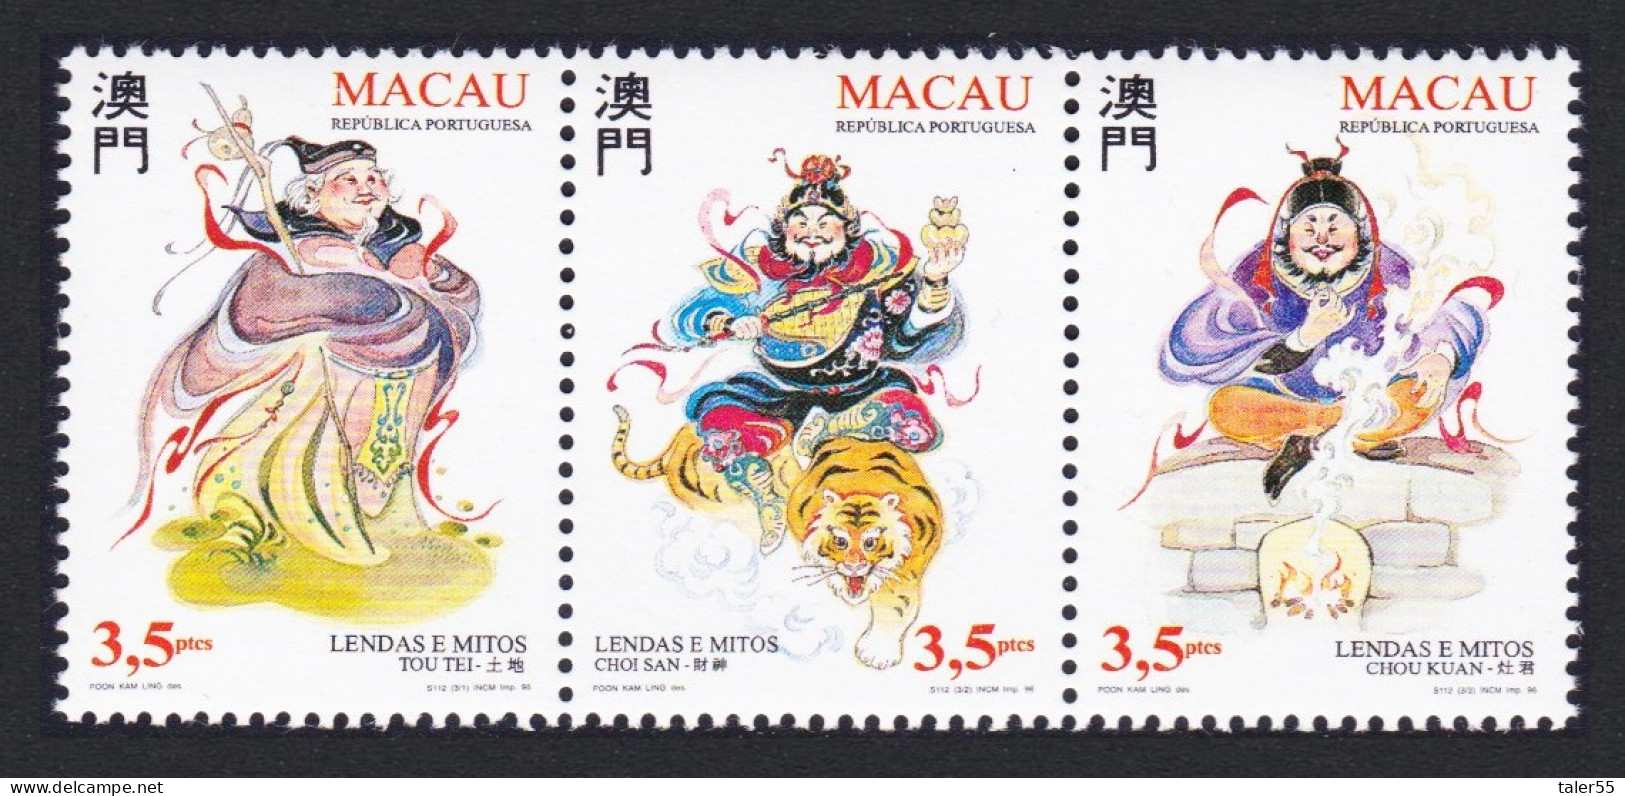 Macao Macau Legends And Myths 3rd Series Strip Of 3v 1996 MNH SG#930-932 Sc#819a - Unused Stamps